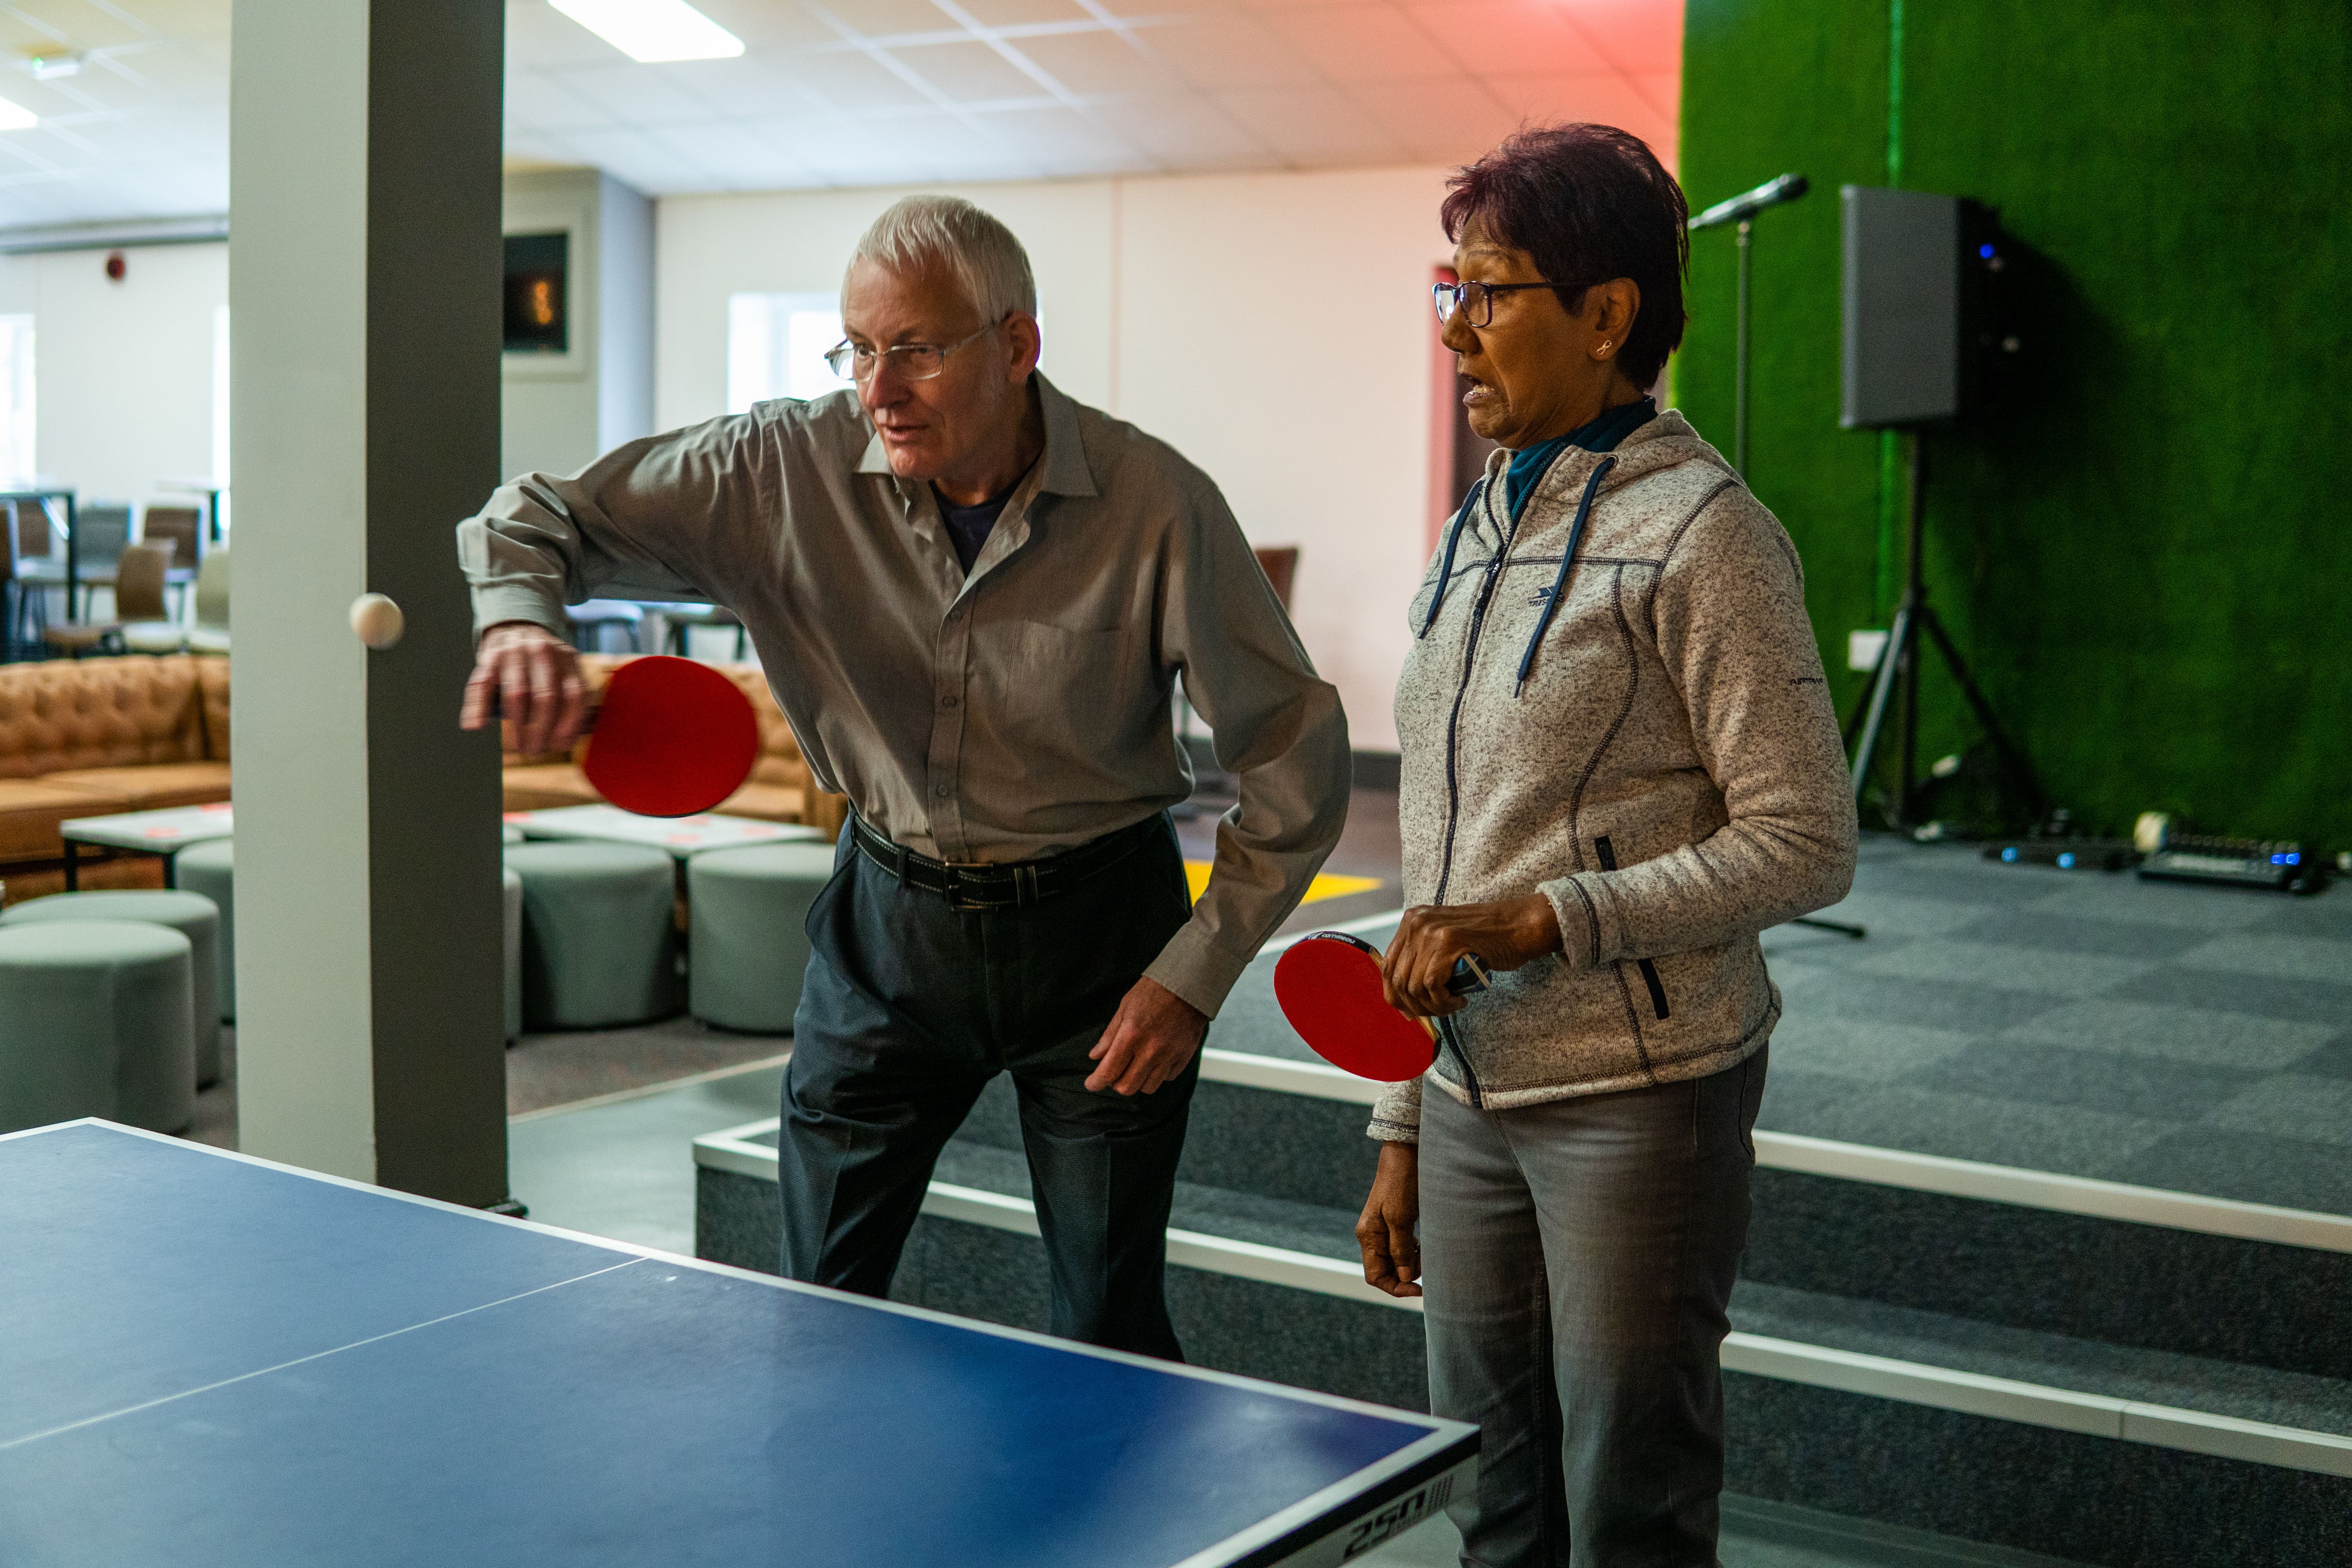 Man and woman playing table tennis together